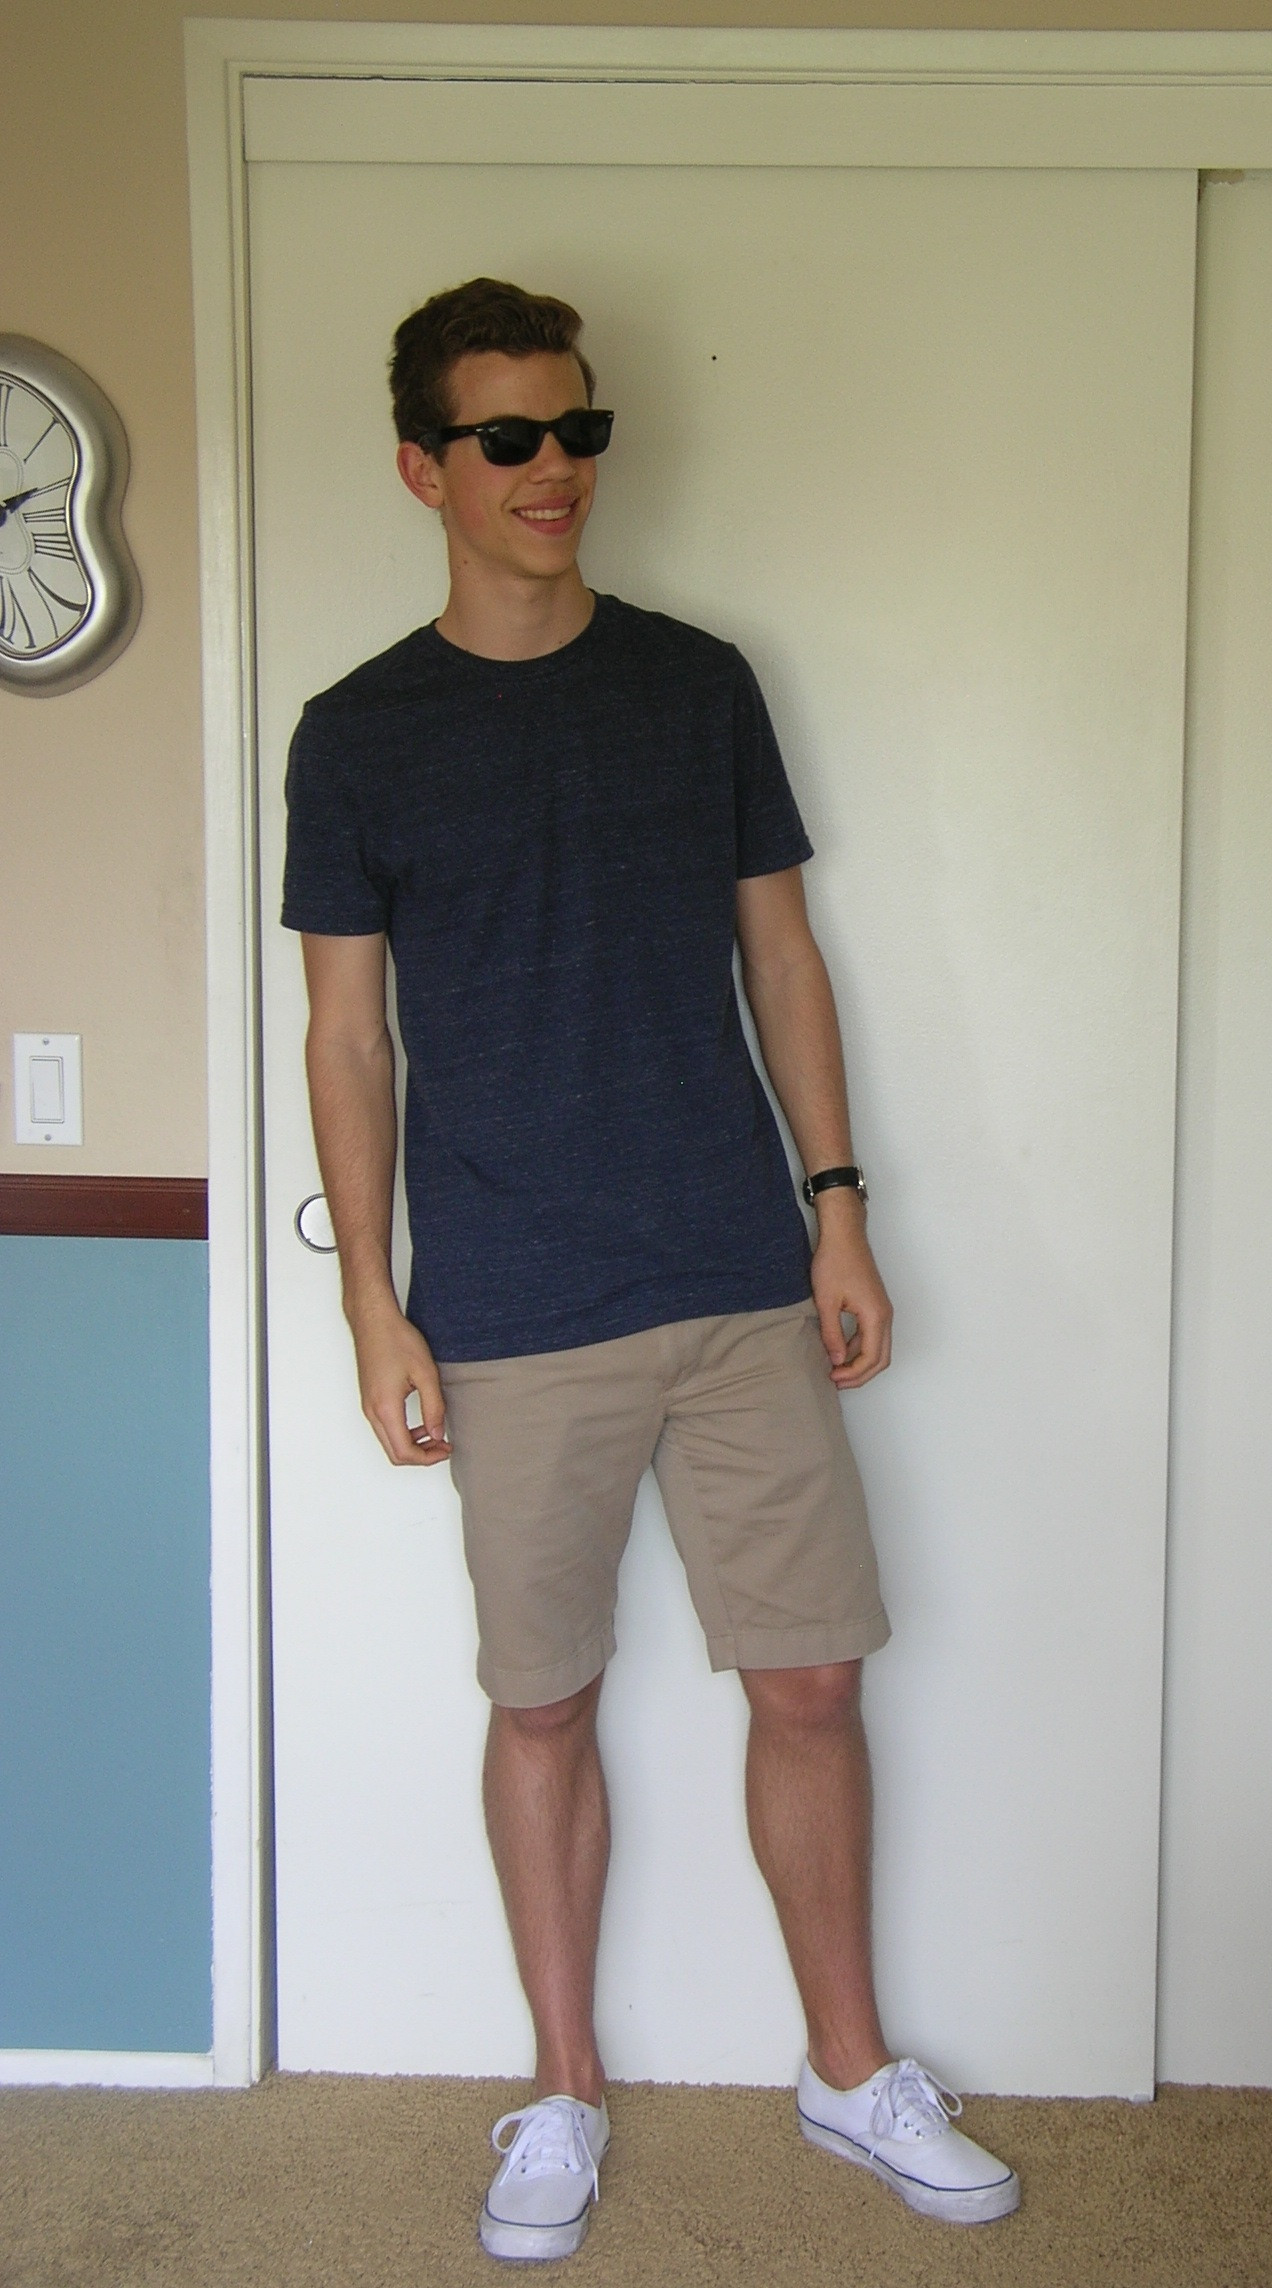 How To Wear Shorts With a Navy Crew-neck T-shirt | Men's Fashion